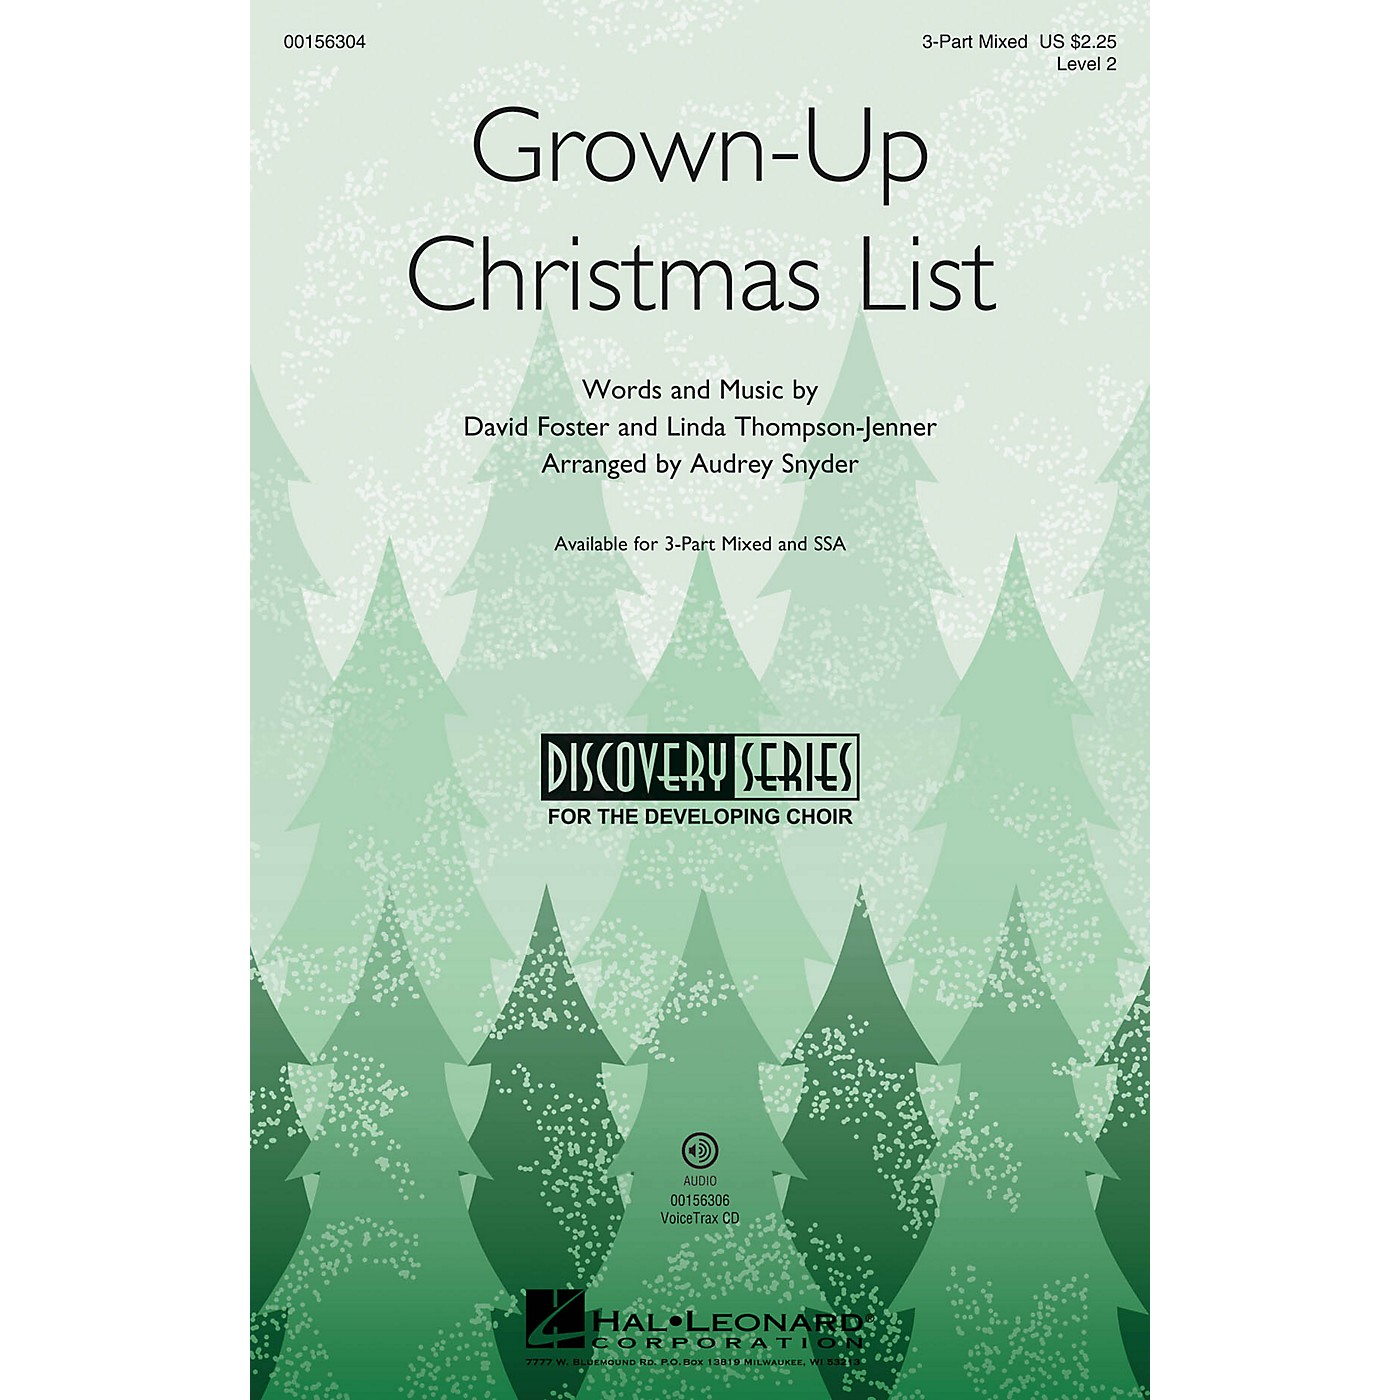 Hal Leonard Grown-Up Christmas List (Discovery Level 2) 3-Part Mixed arranged by Audrey Snyder thumbnail